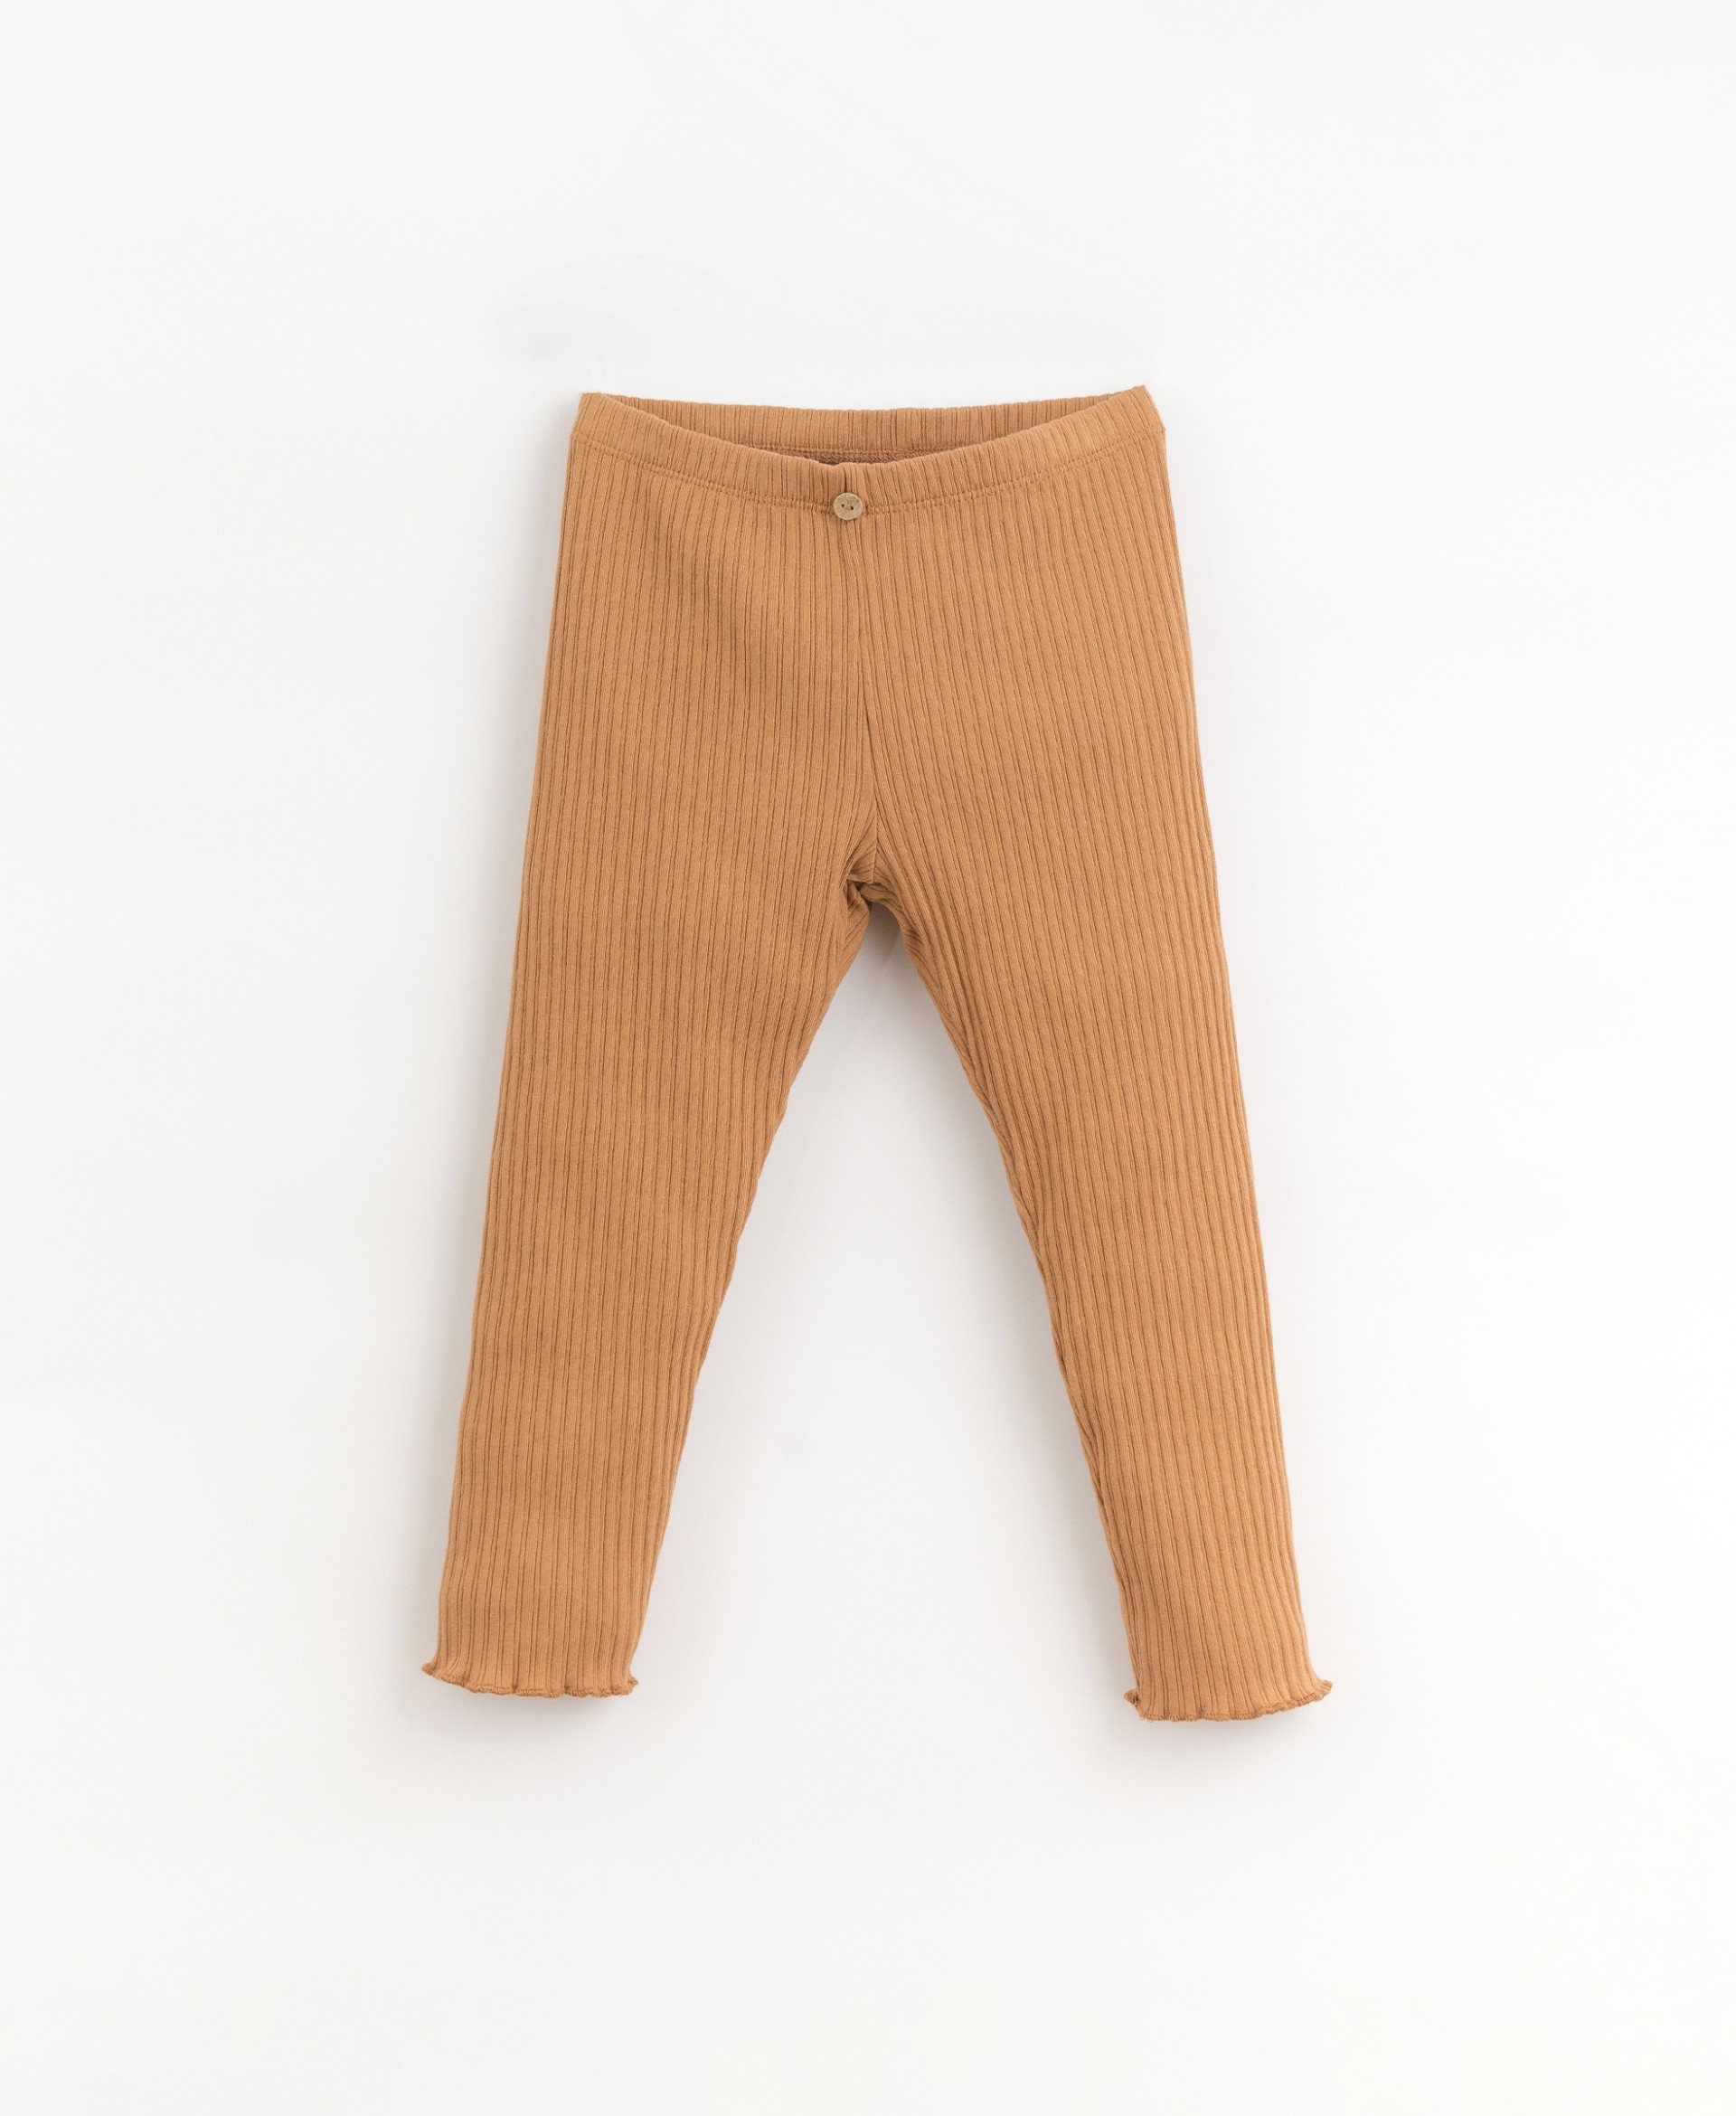 Ribbed leggings with rolled finish | Organic Care